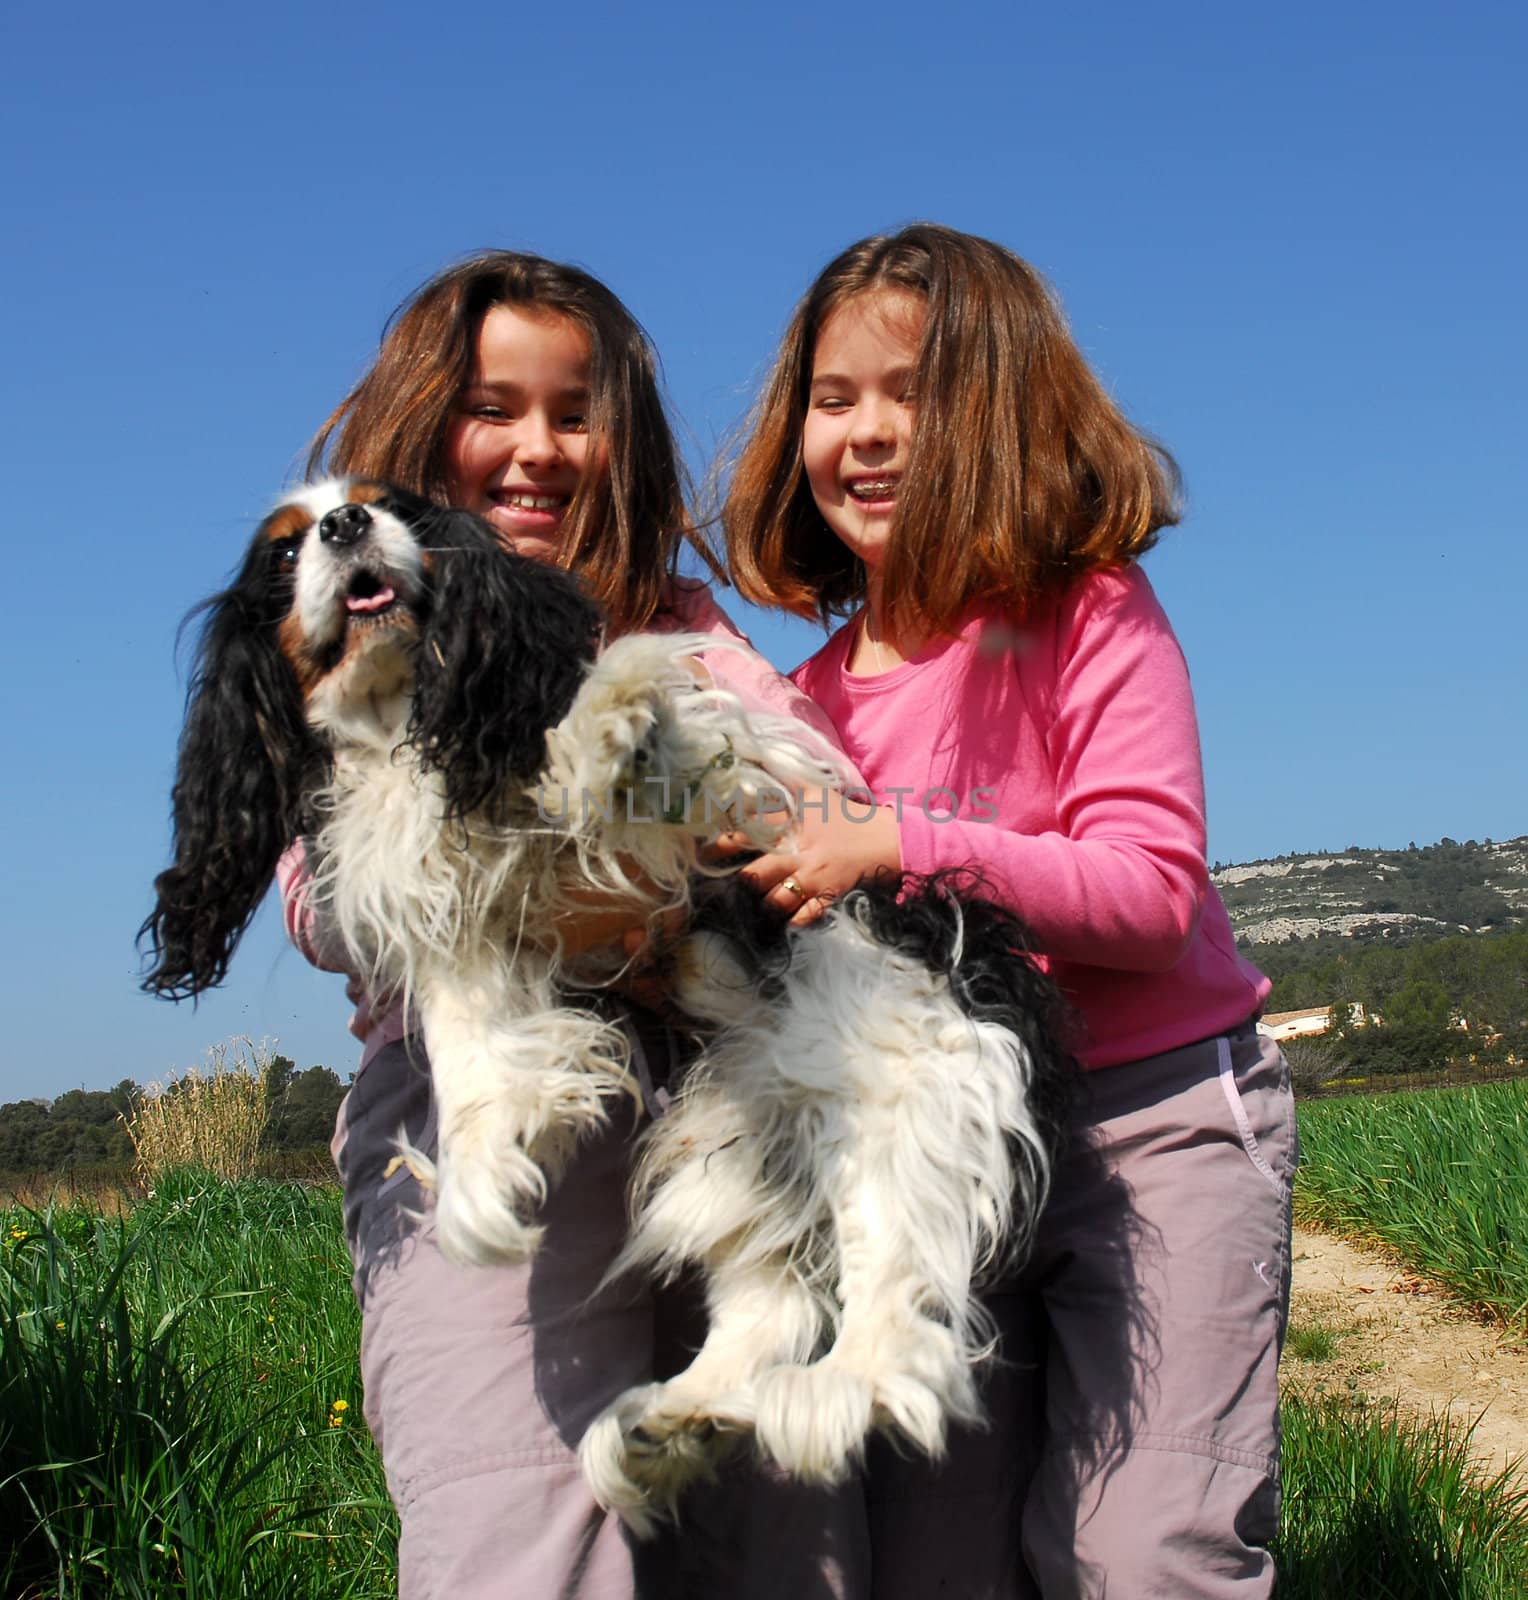 twins sister and little dog cavalier king charles